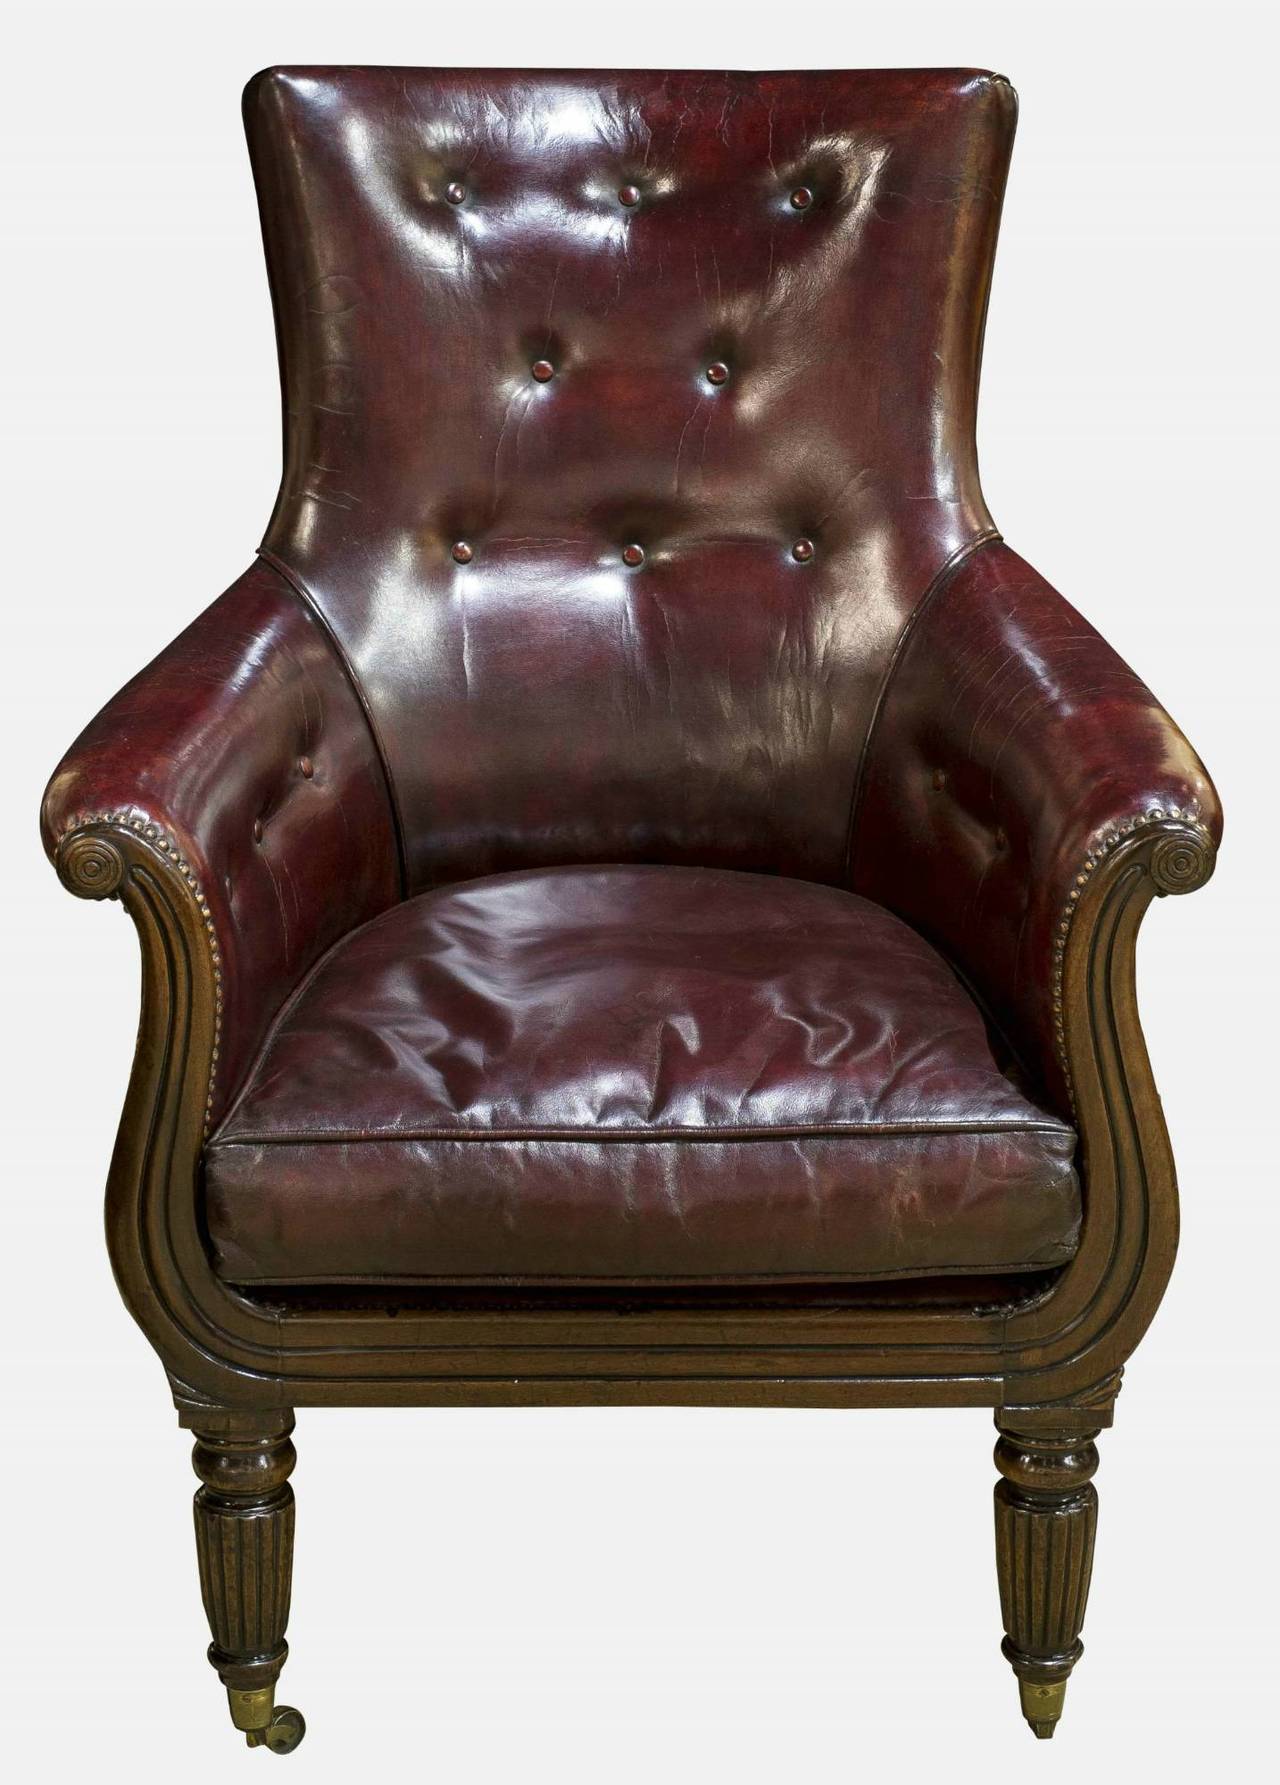 A Regency mahogany library chair upholstered in burgundy red leather in the manner of George Smith.